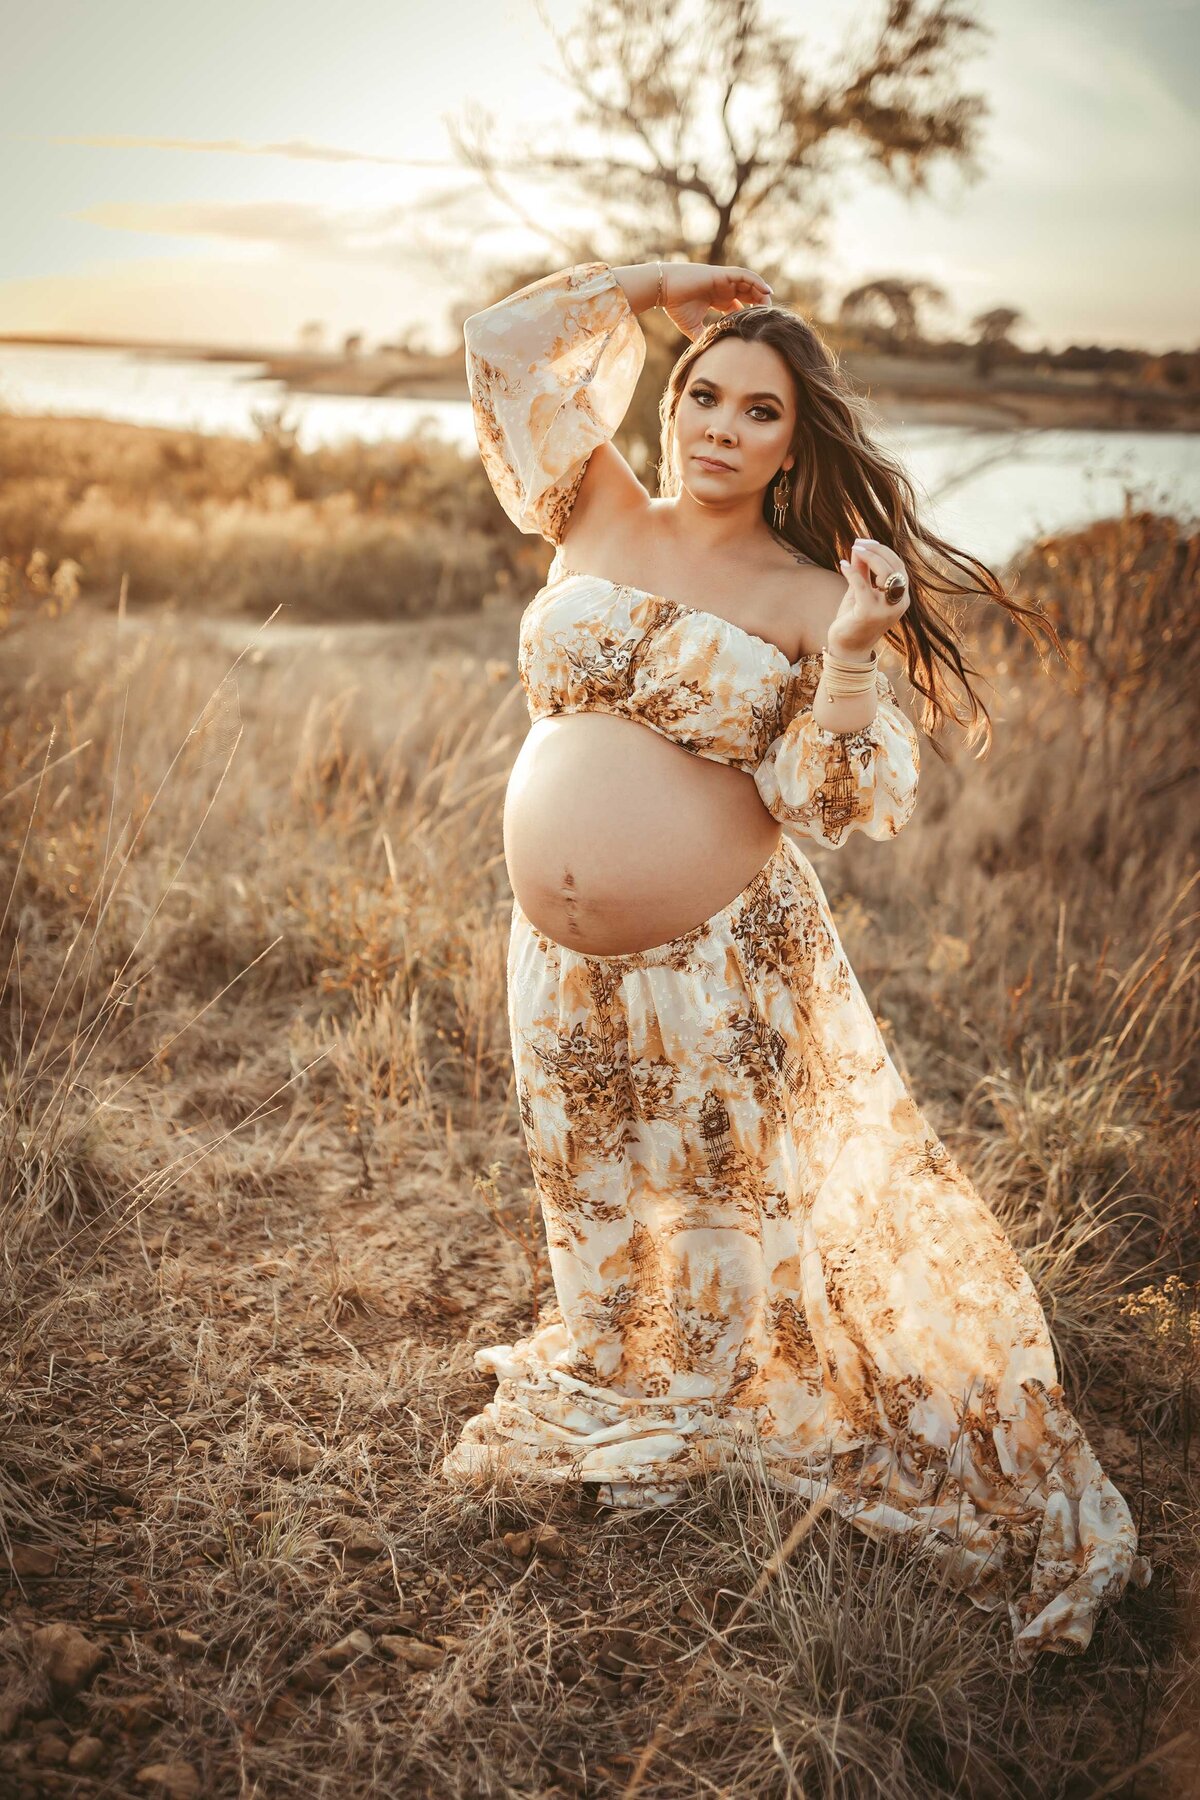 Woman in a Dallas maternity session in a field of grass. Her dress and hair are moving with the wind. The sun is shining and reflecting on the water.